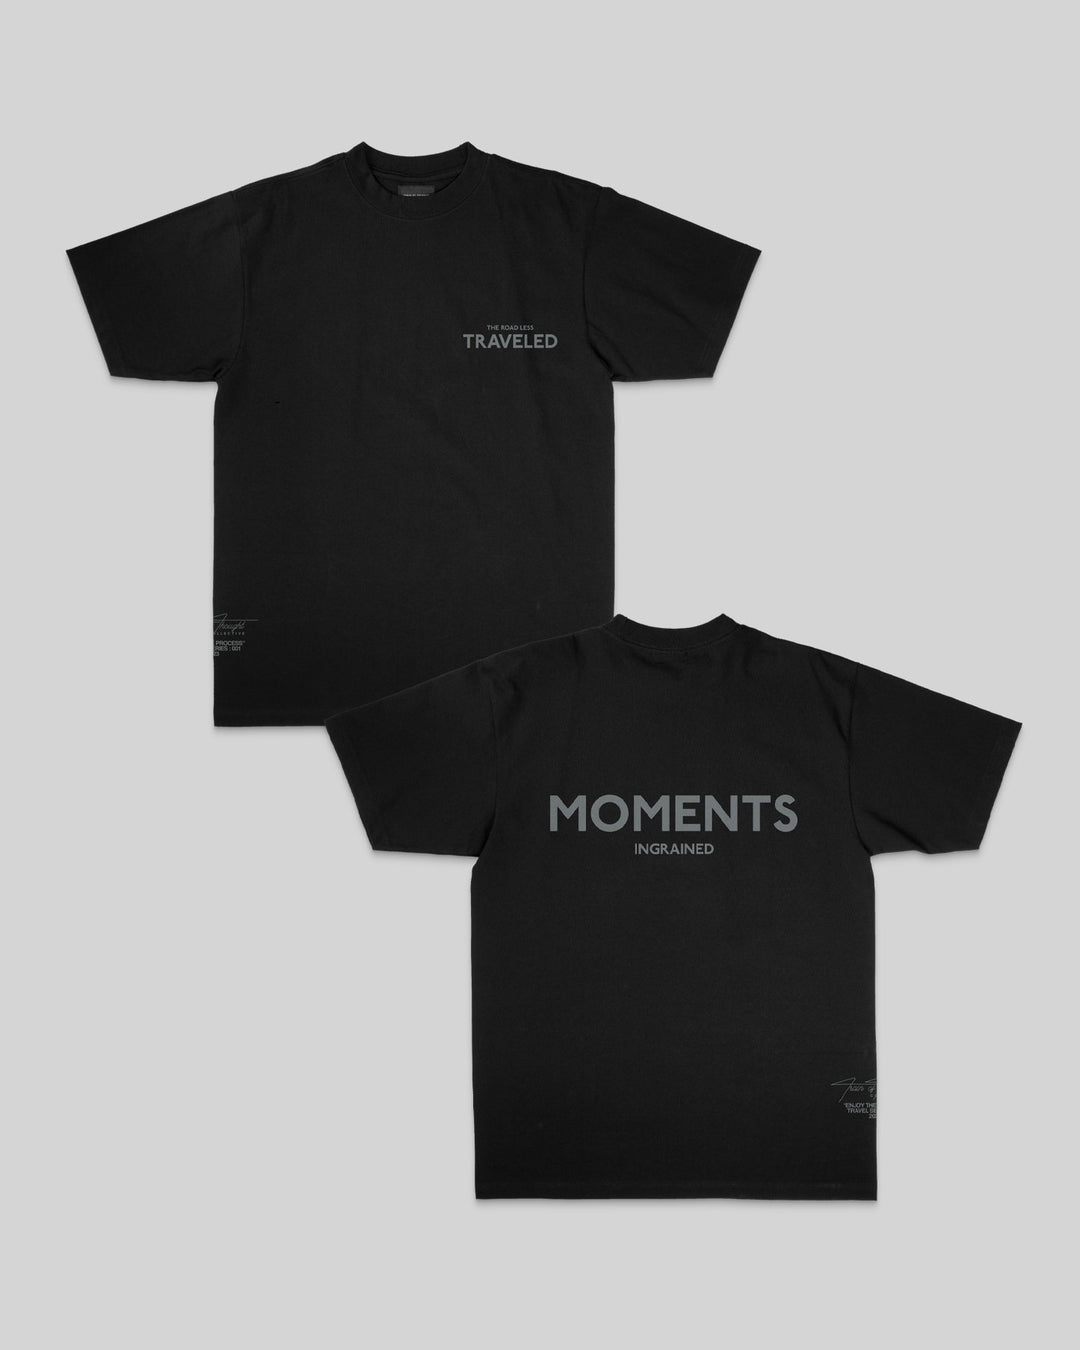 Moments Ingrained Black Tee - trainofthoughtcollective